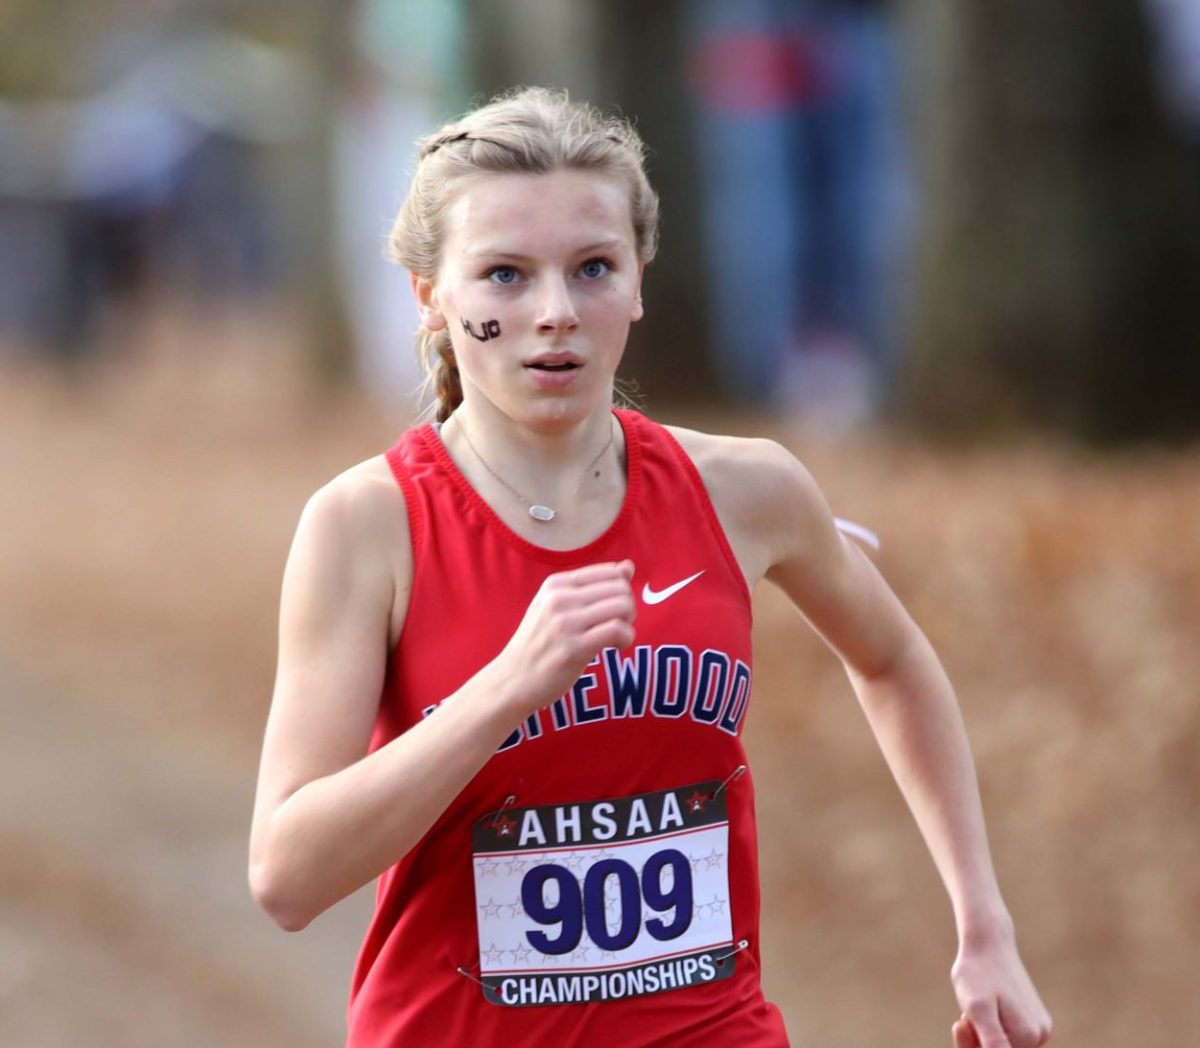 Homewoods Emma Brooke Levering was the overall winner in the 6A state championship run in Oakville on Saturday. [BY DEANGELO MCDANIEL]